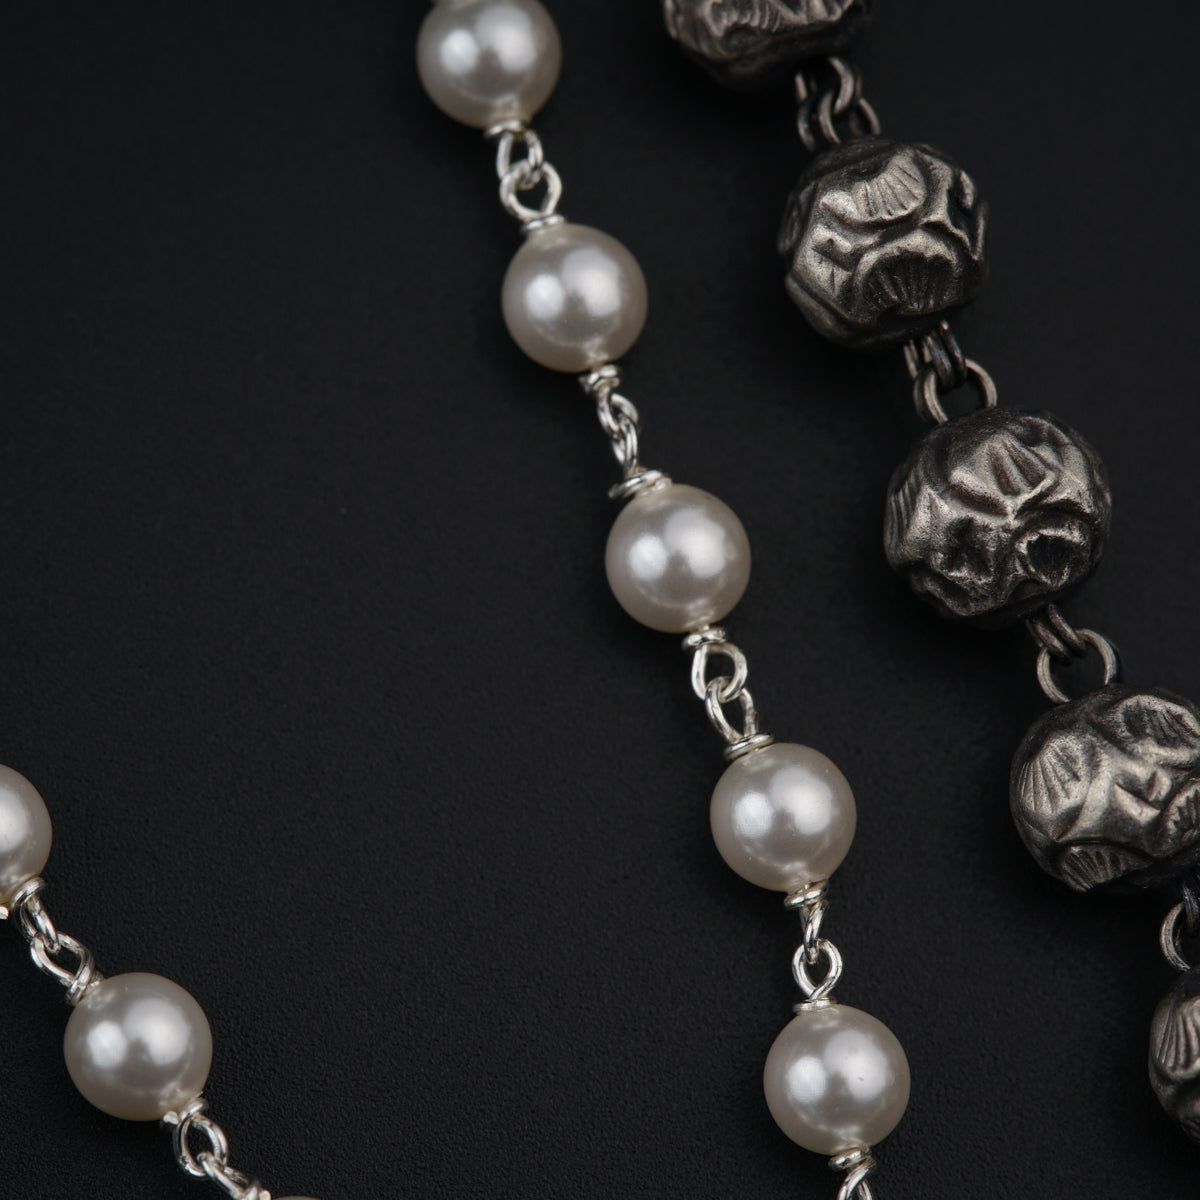 a rosary with skulls and pearls on a black background